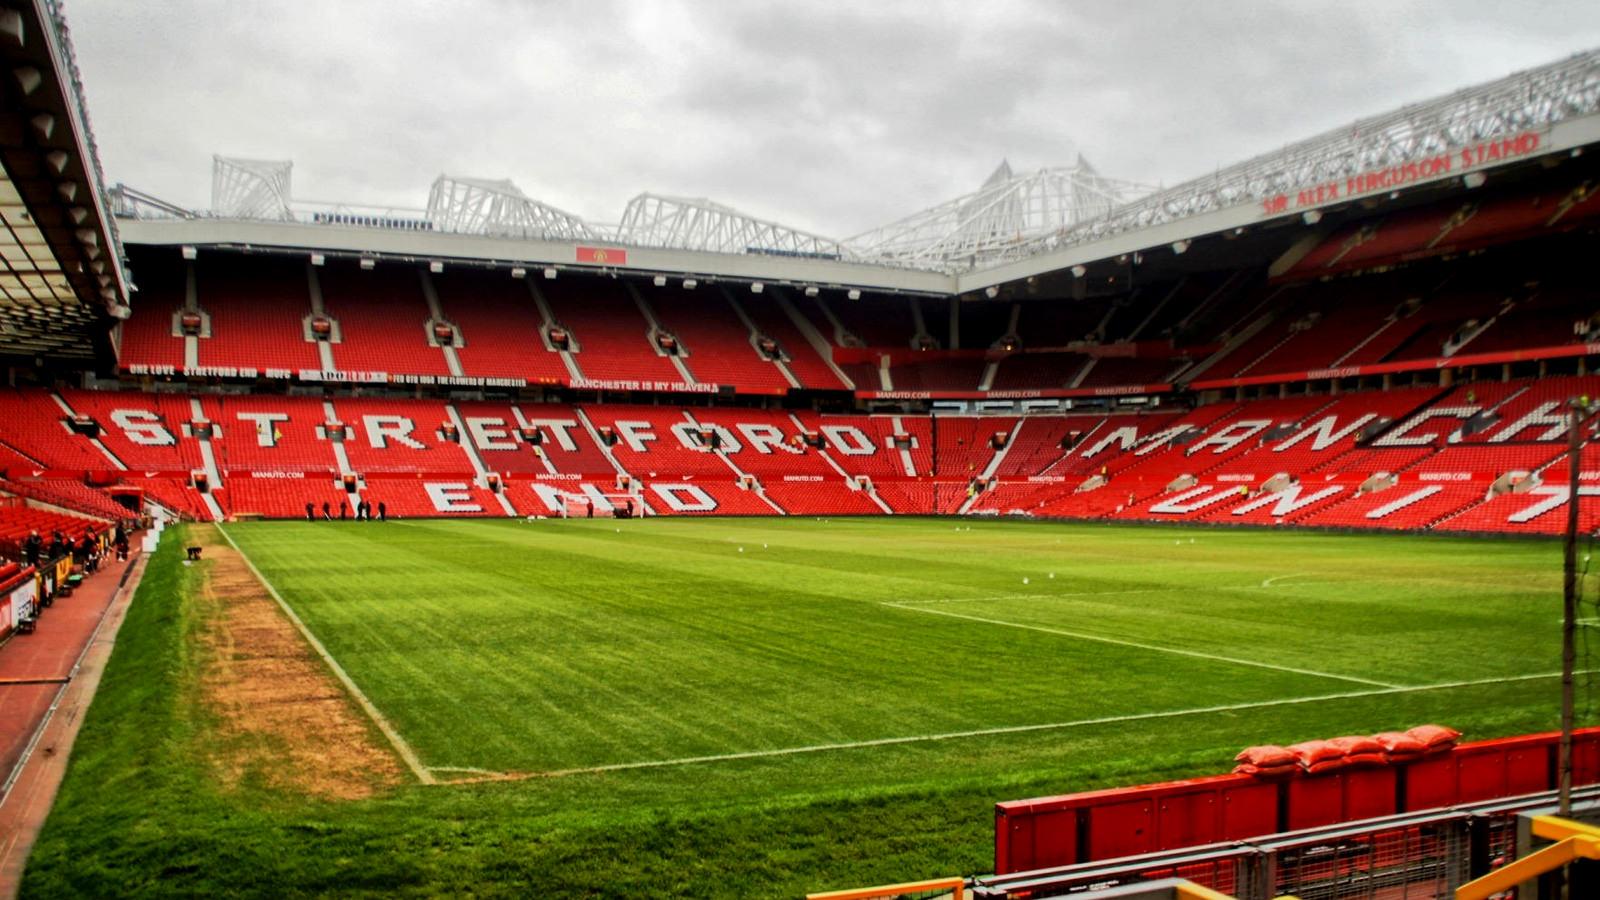 Travel to Old Trafford, Manchester United's Headquarters